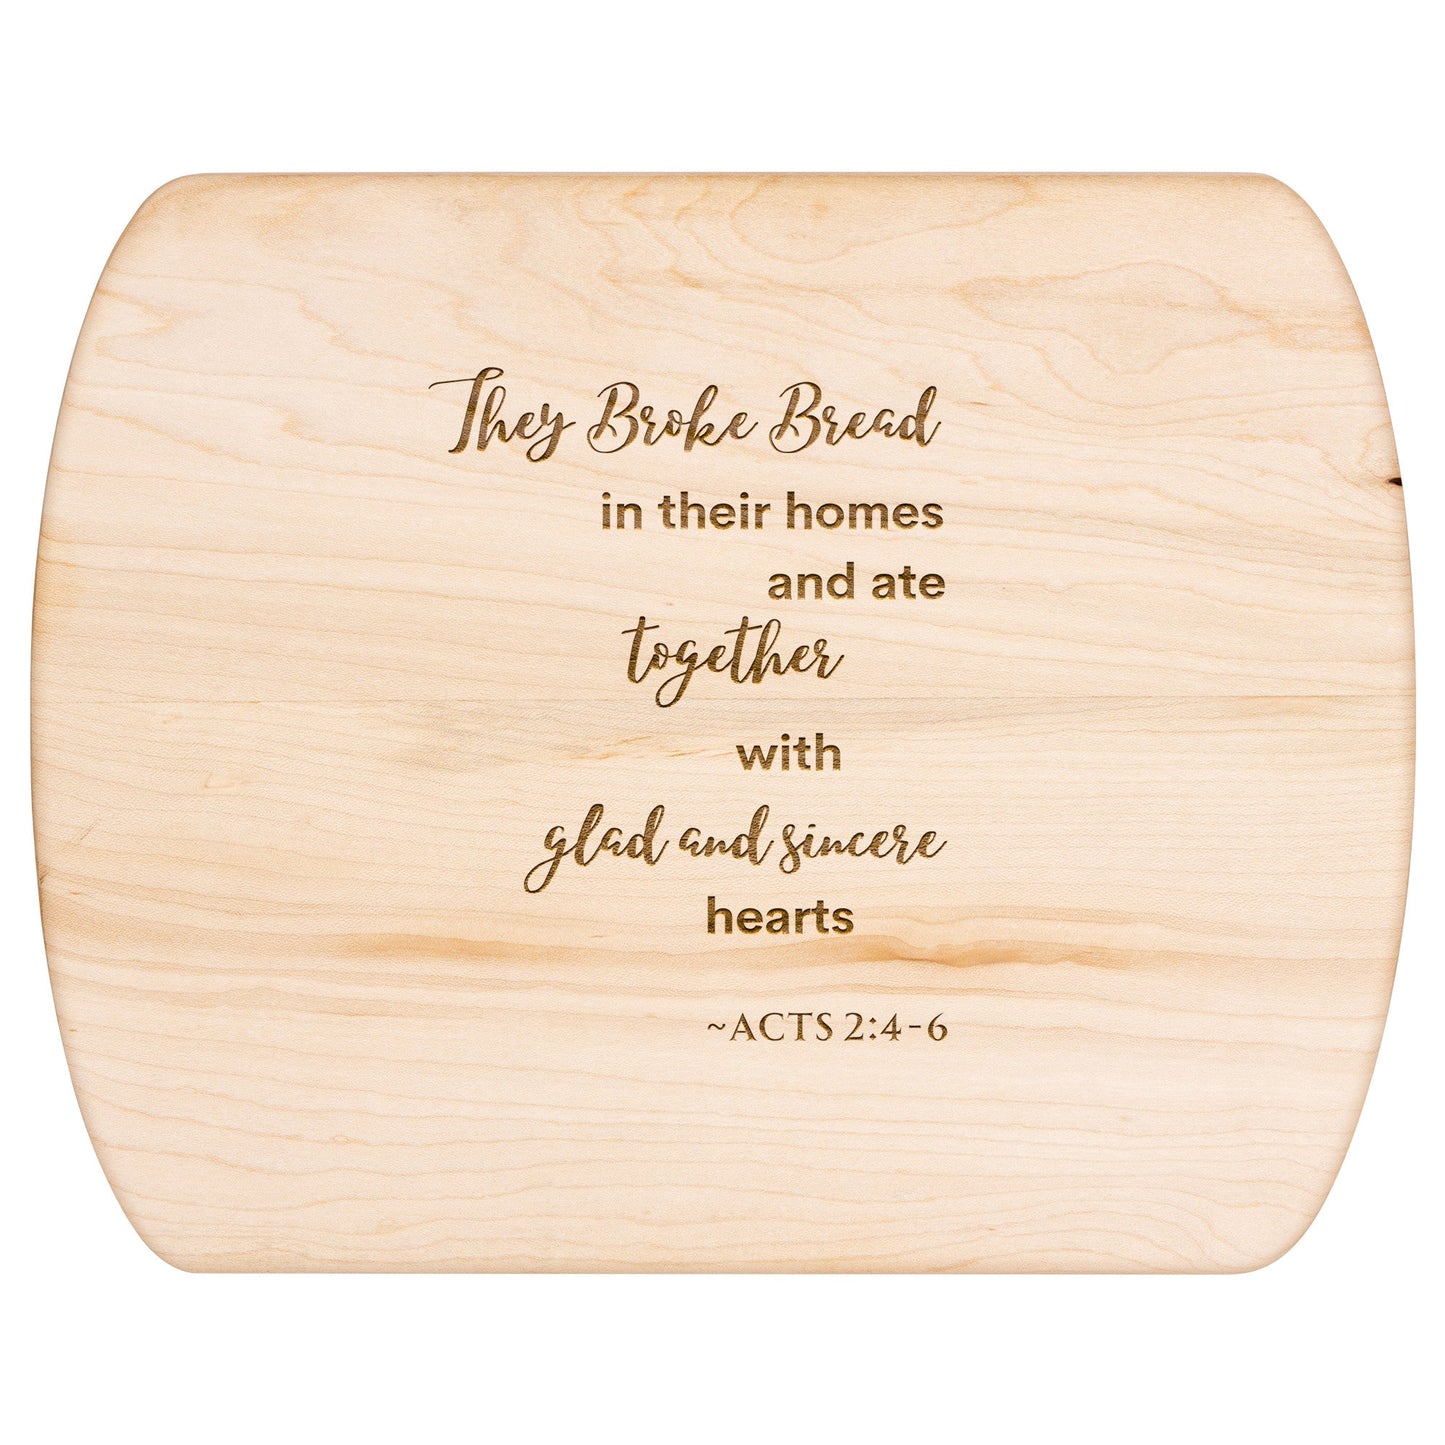 Get trendy with Cutting Bard with Acts 2:46 Scripture - Kitchenware available at Good Gift Company. Grab yours for $19.99 today!